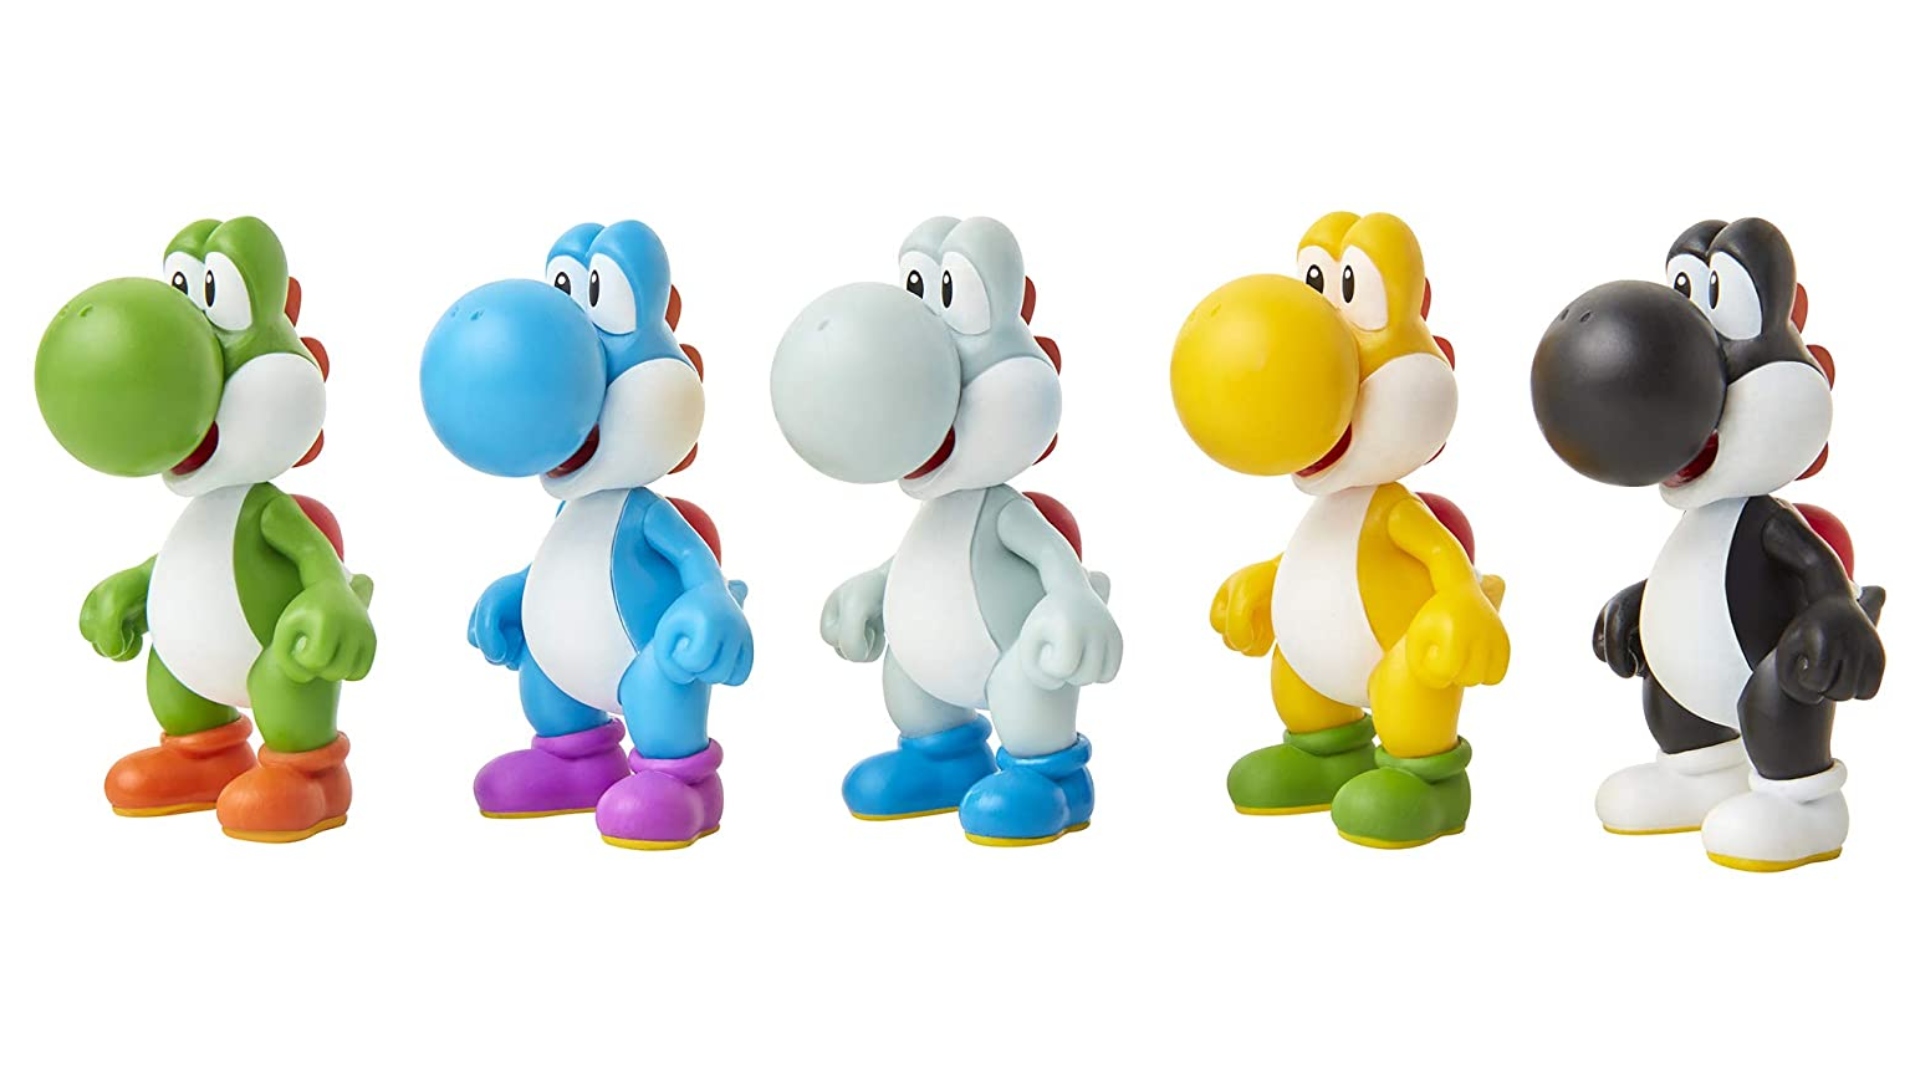 Five Yoshi figures, each is a different colour: green, light blue, white, yellow and black.